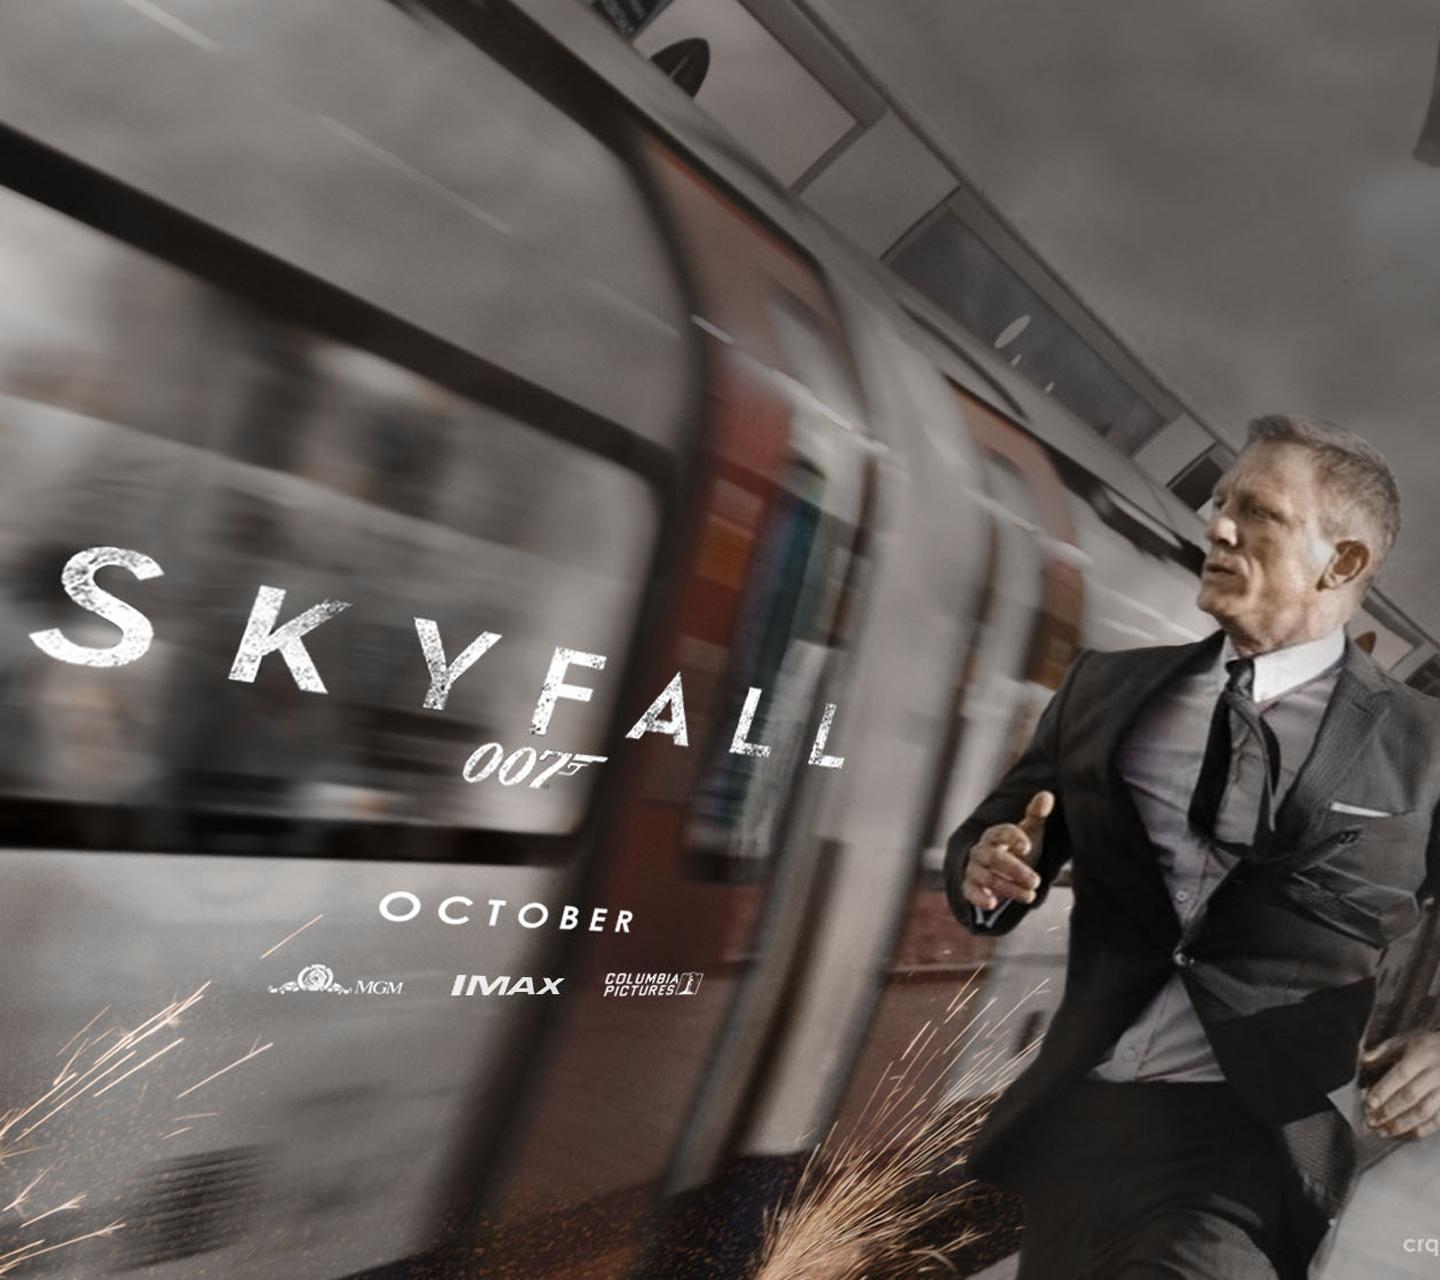 Skyfall download the new version for ios